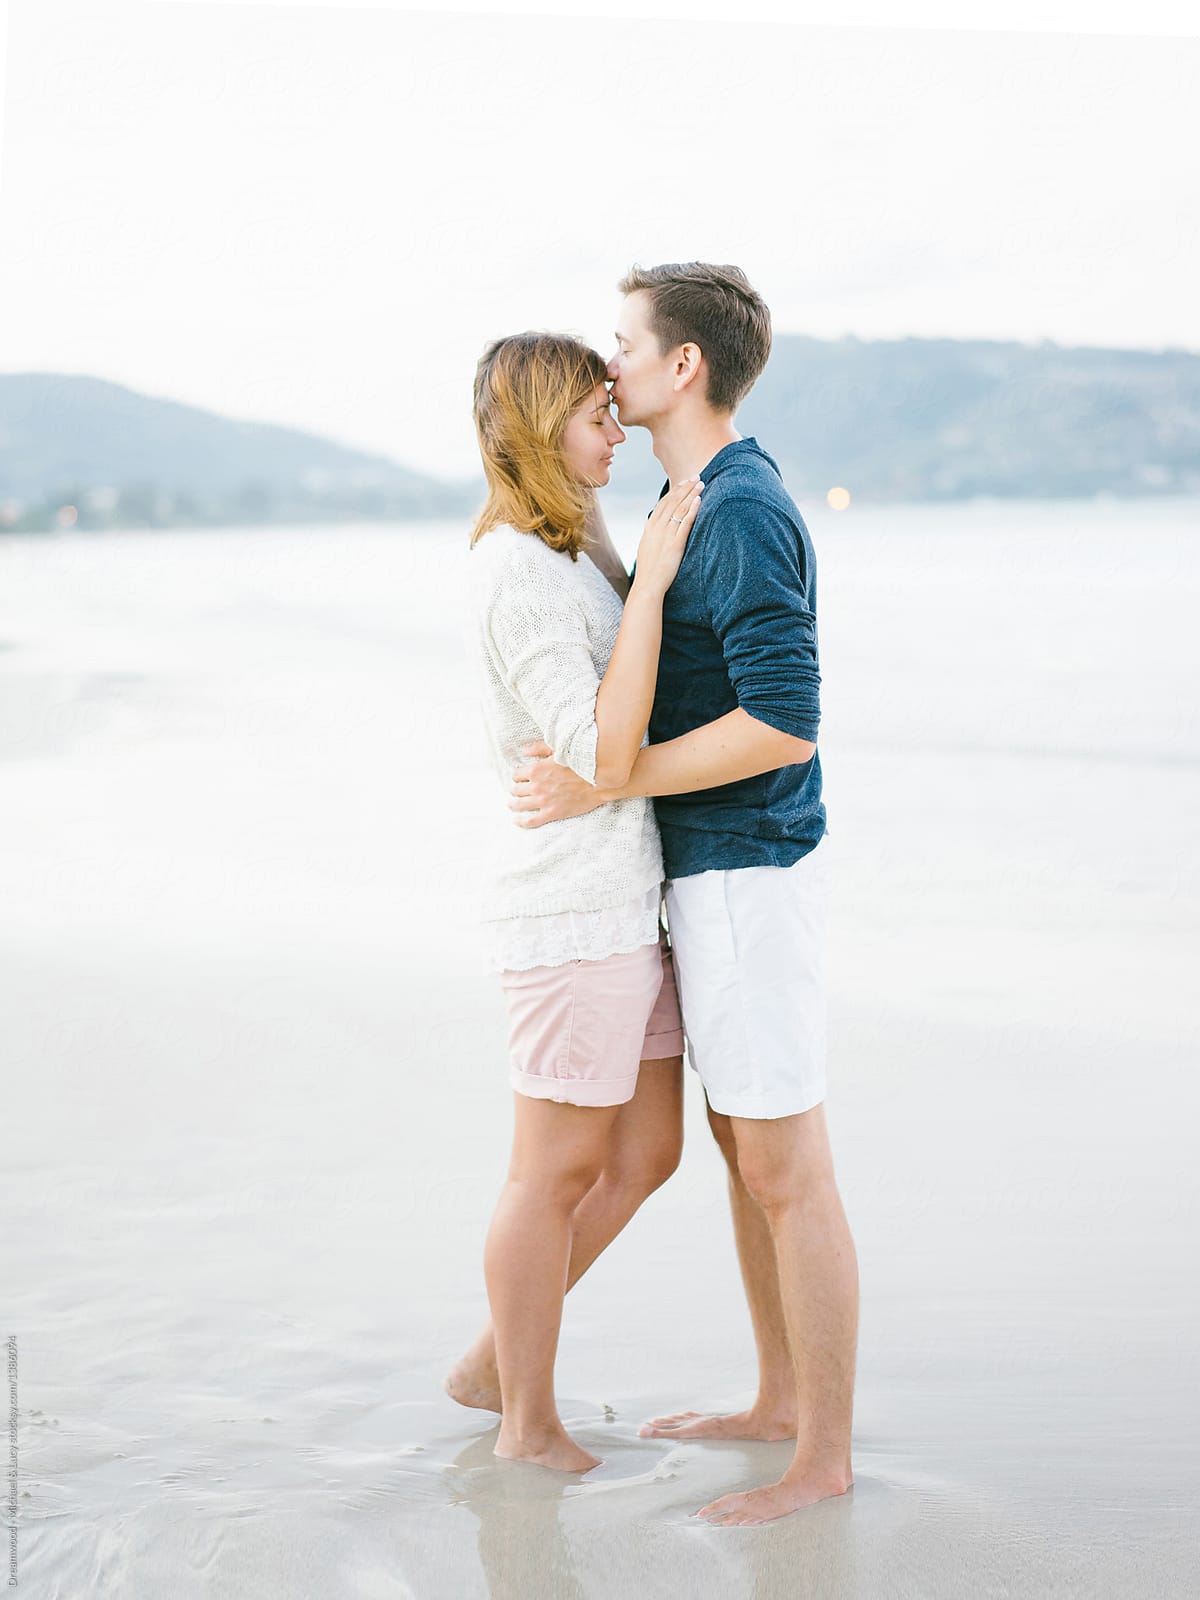 Sweet Honeymoon Couple Photos to Take Your Dose of Inspiration From